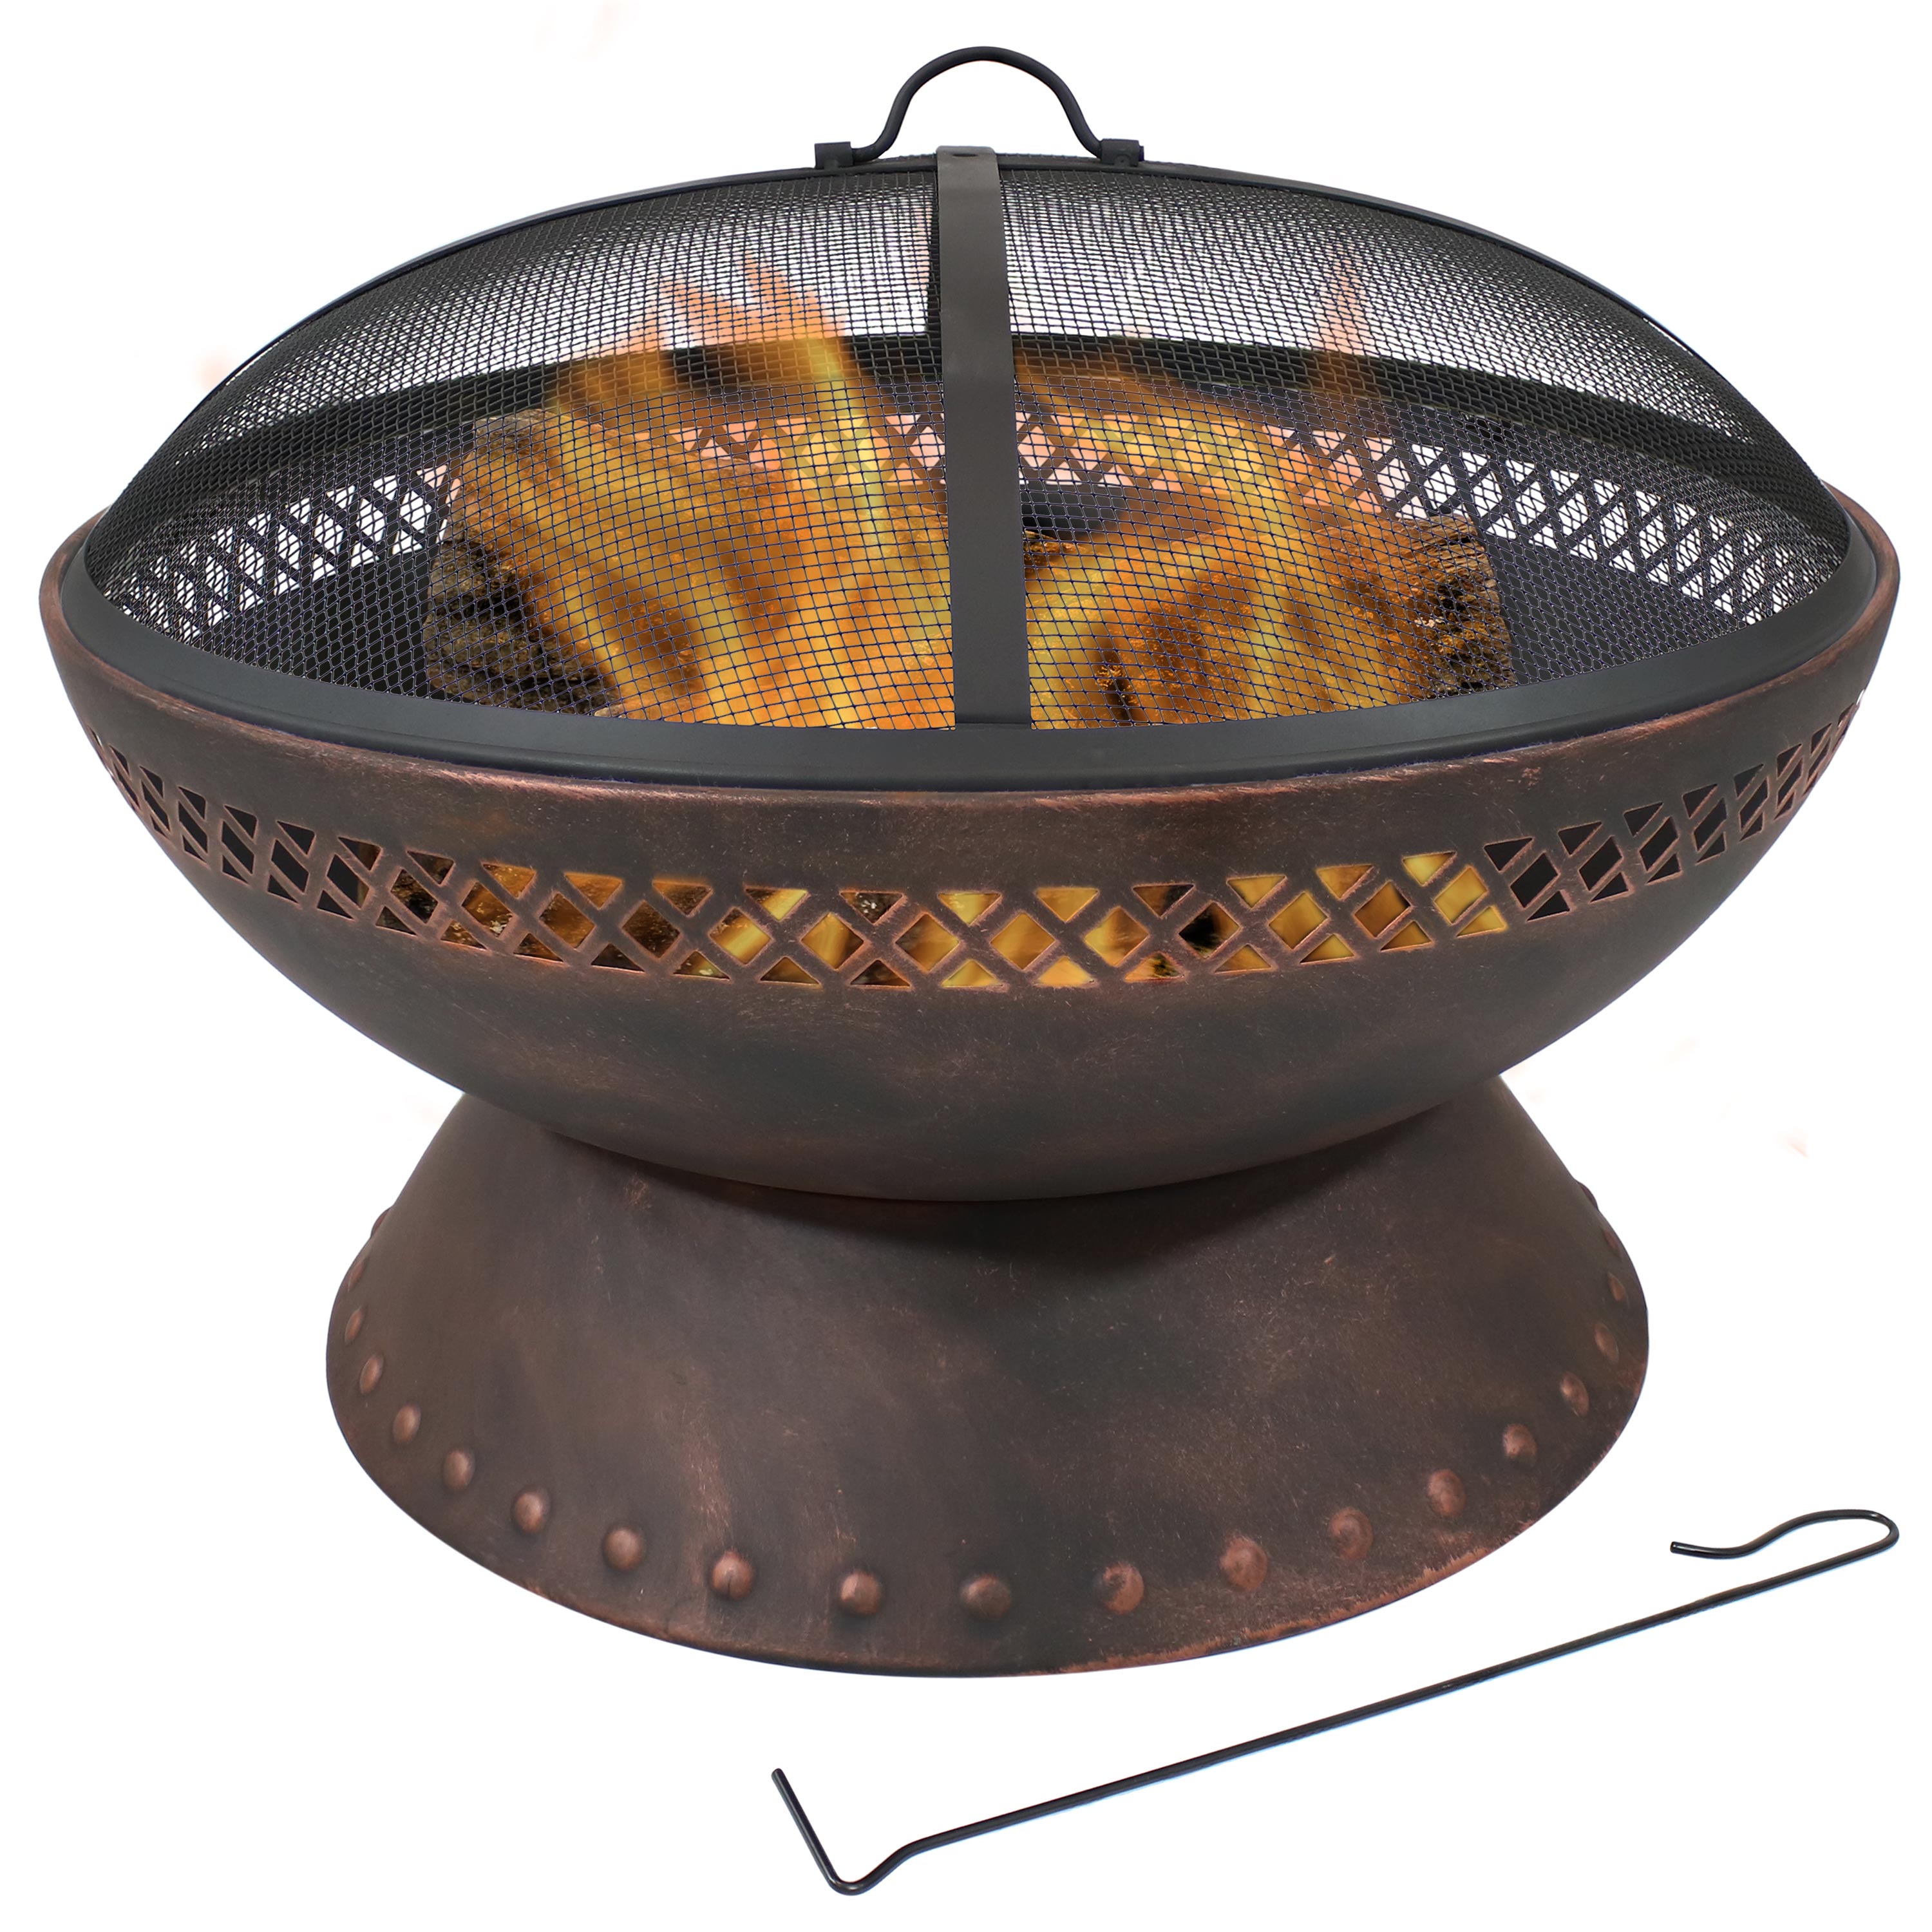 25 in Chalice Steel Fire Pit with Spark Screen - Copper